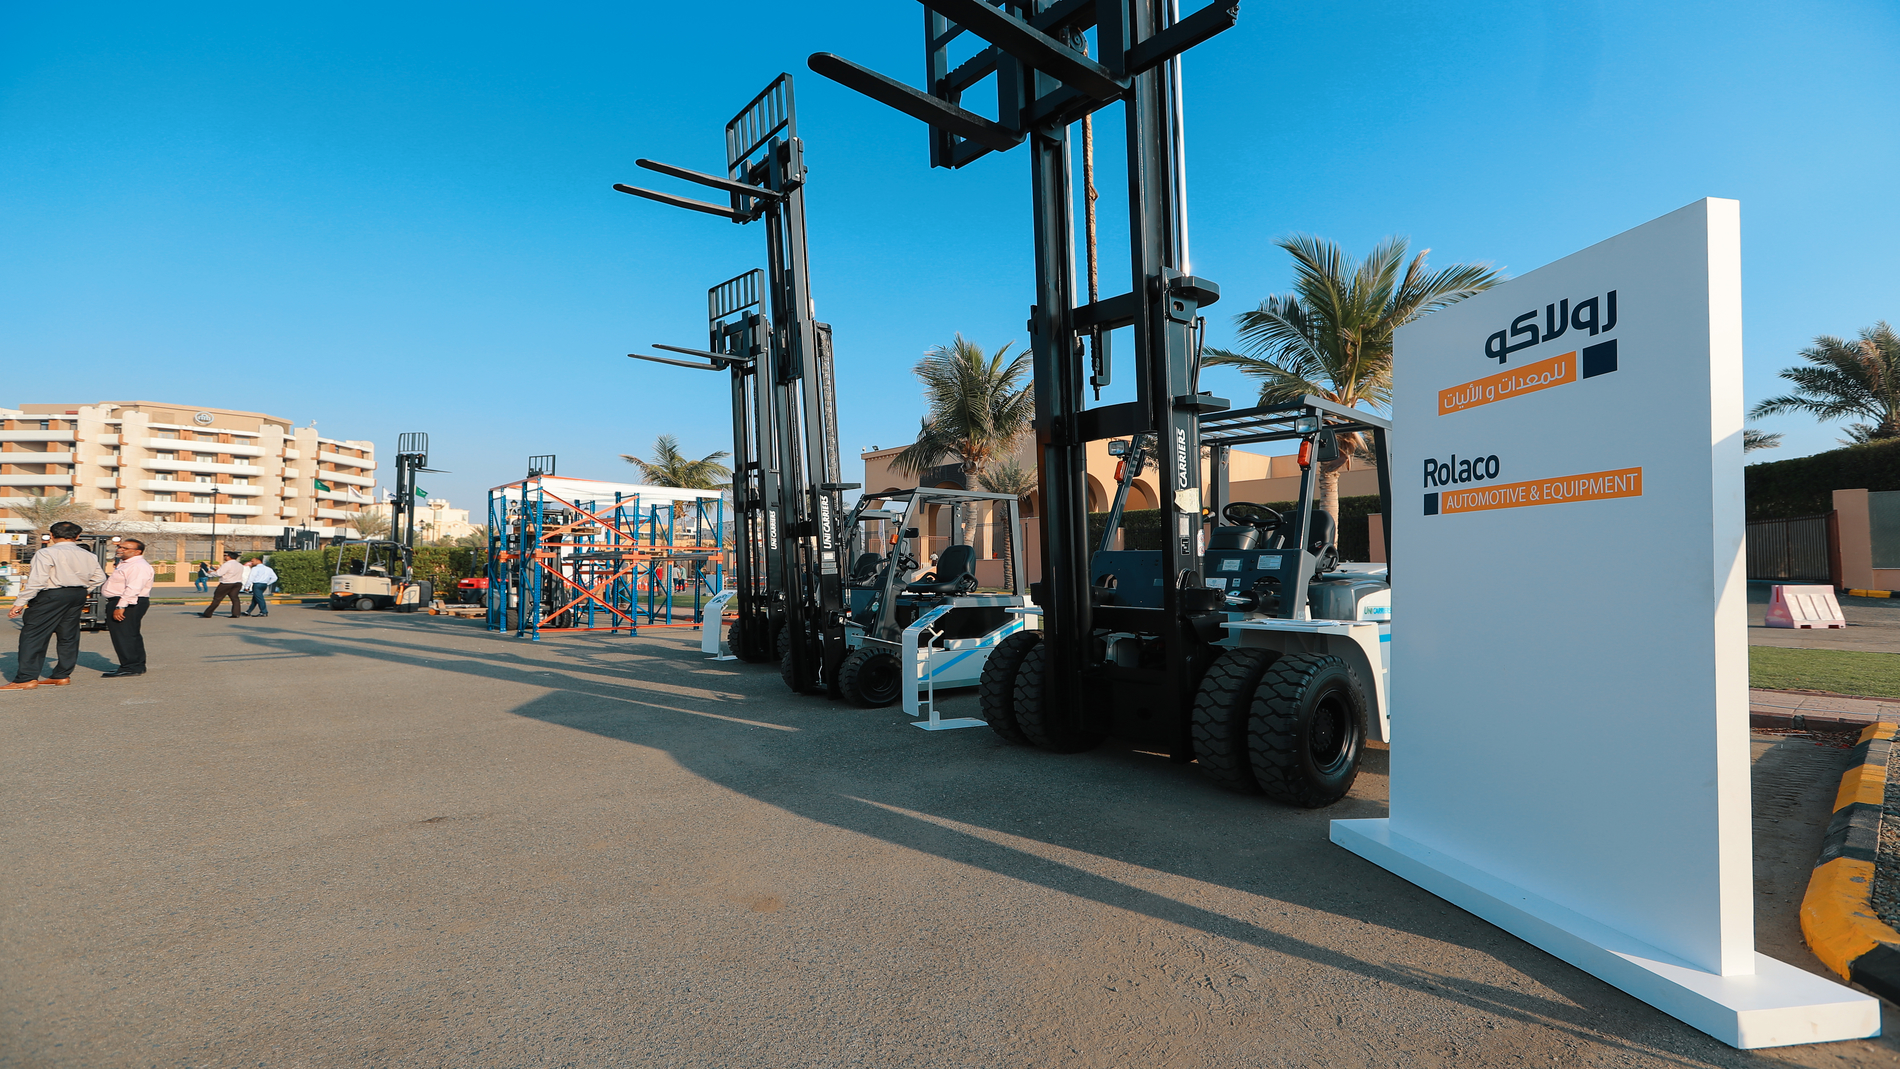 Materials Handling Middle East - Product Groups